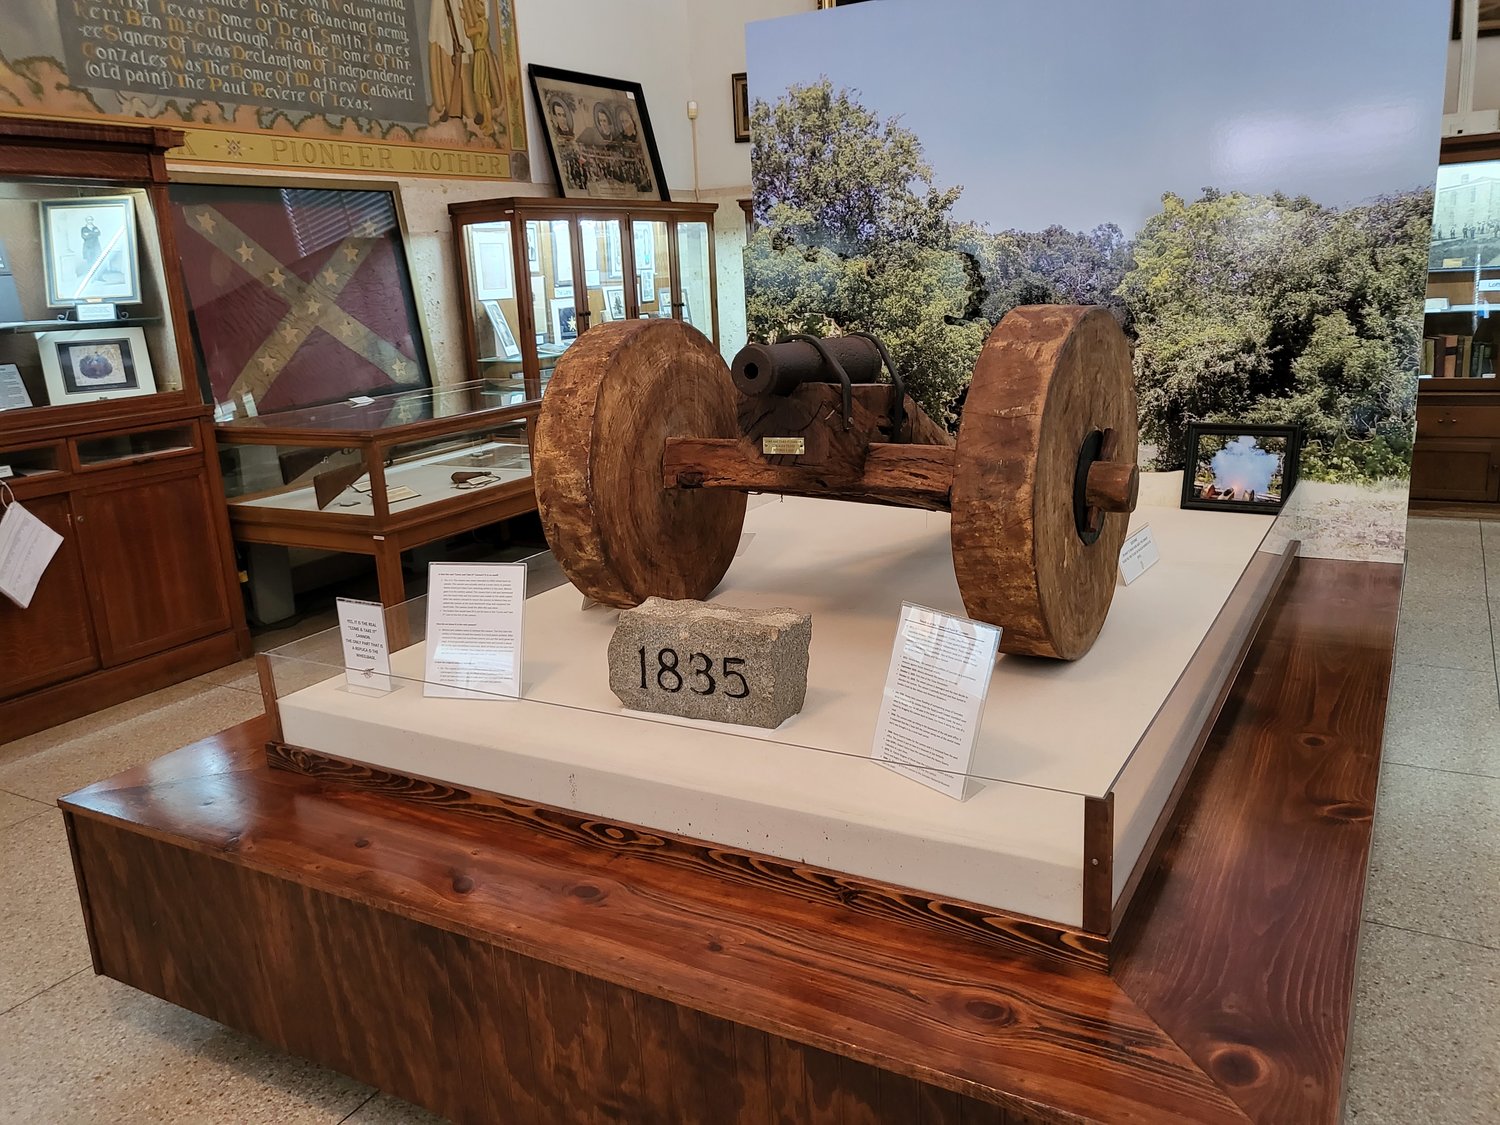 The infamous Gonzales cannon, defended by The Old 18 against the Mexican Army during the Battle of Gonzales, still stands proud at the Gonzales Memorial Museum. It was this act of defiance that is celebrated during the annual Come and Take It Celebration, which will be held Oct. 1-3.